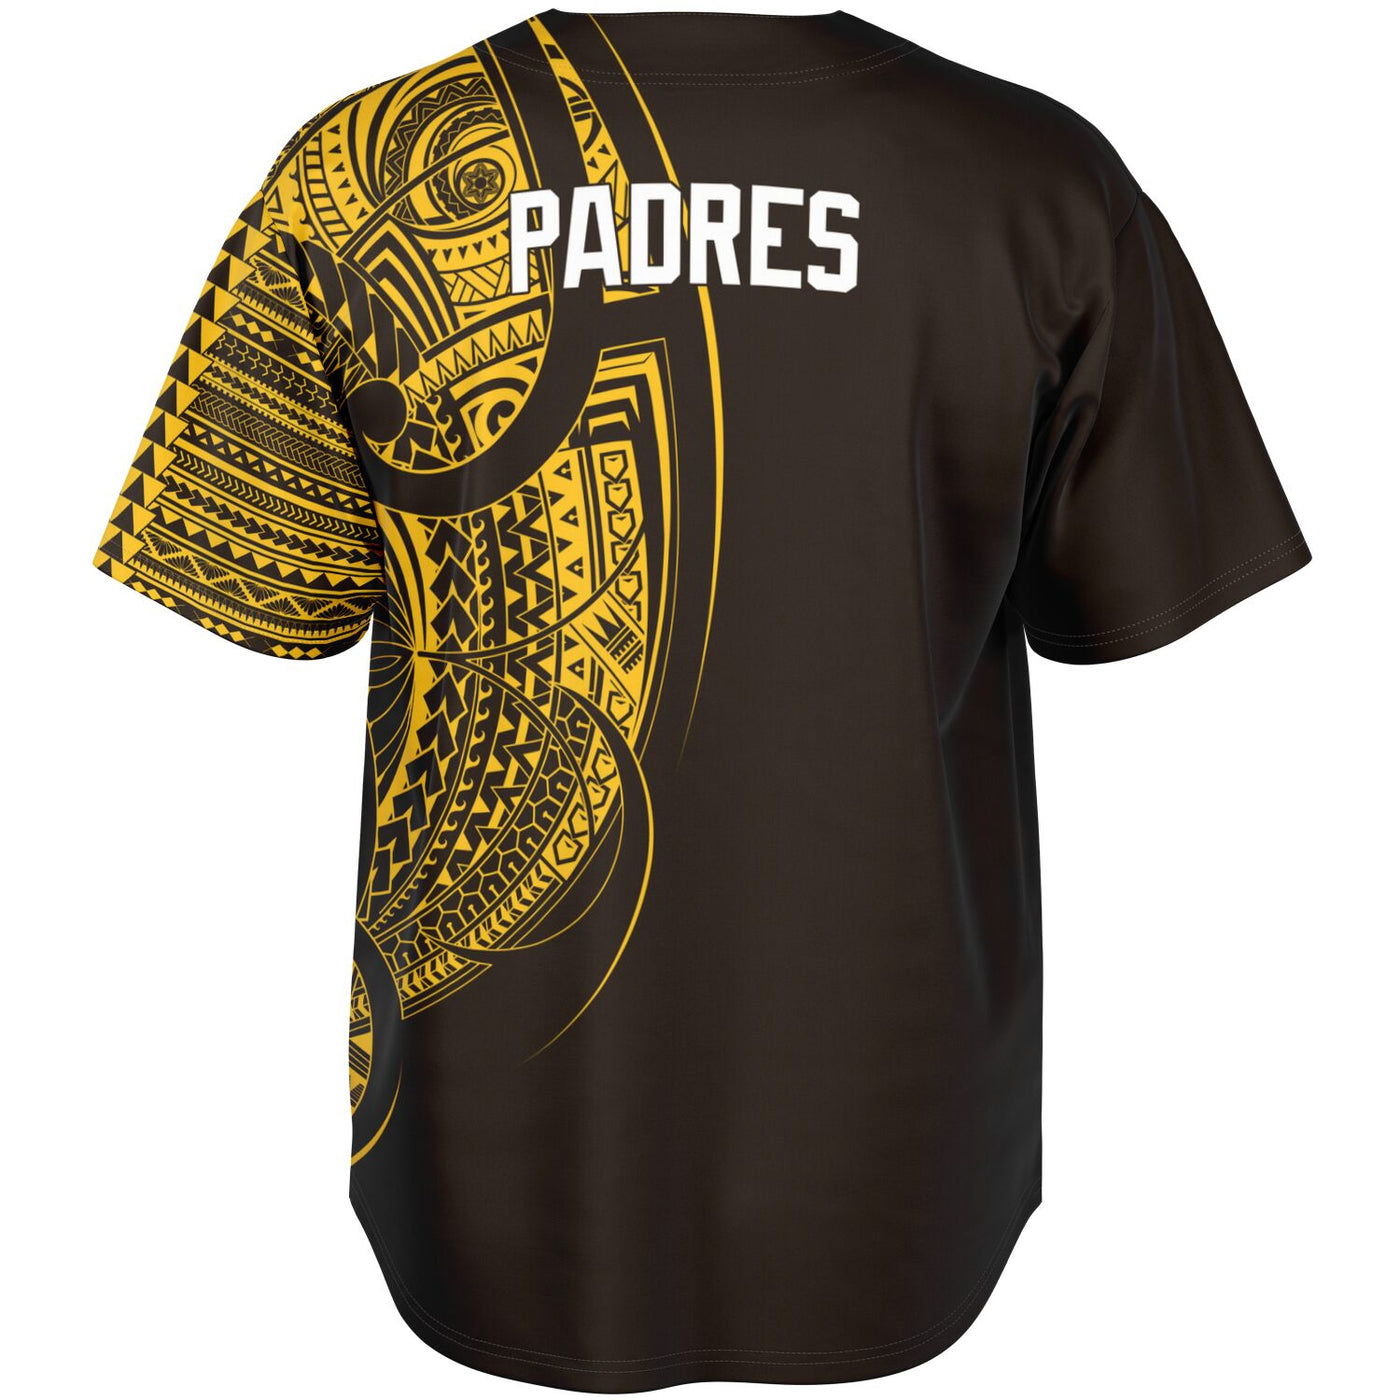 Official Kids San Diego Padres Gear, Youth Padres Apparel, Merchandise